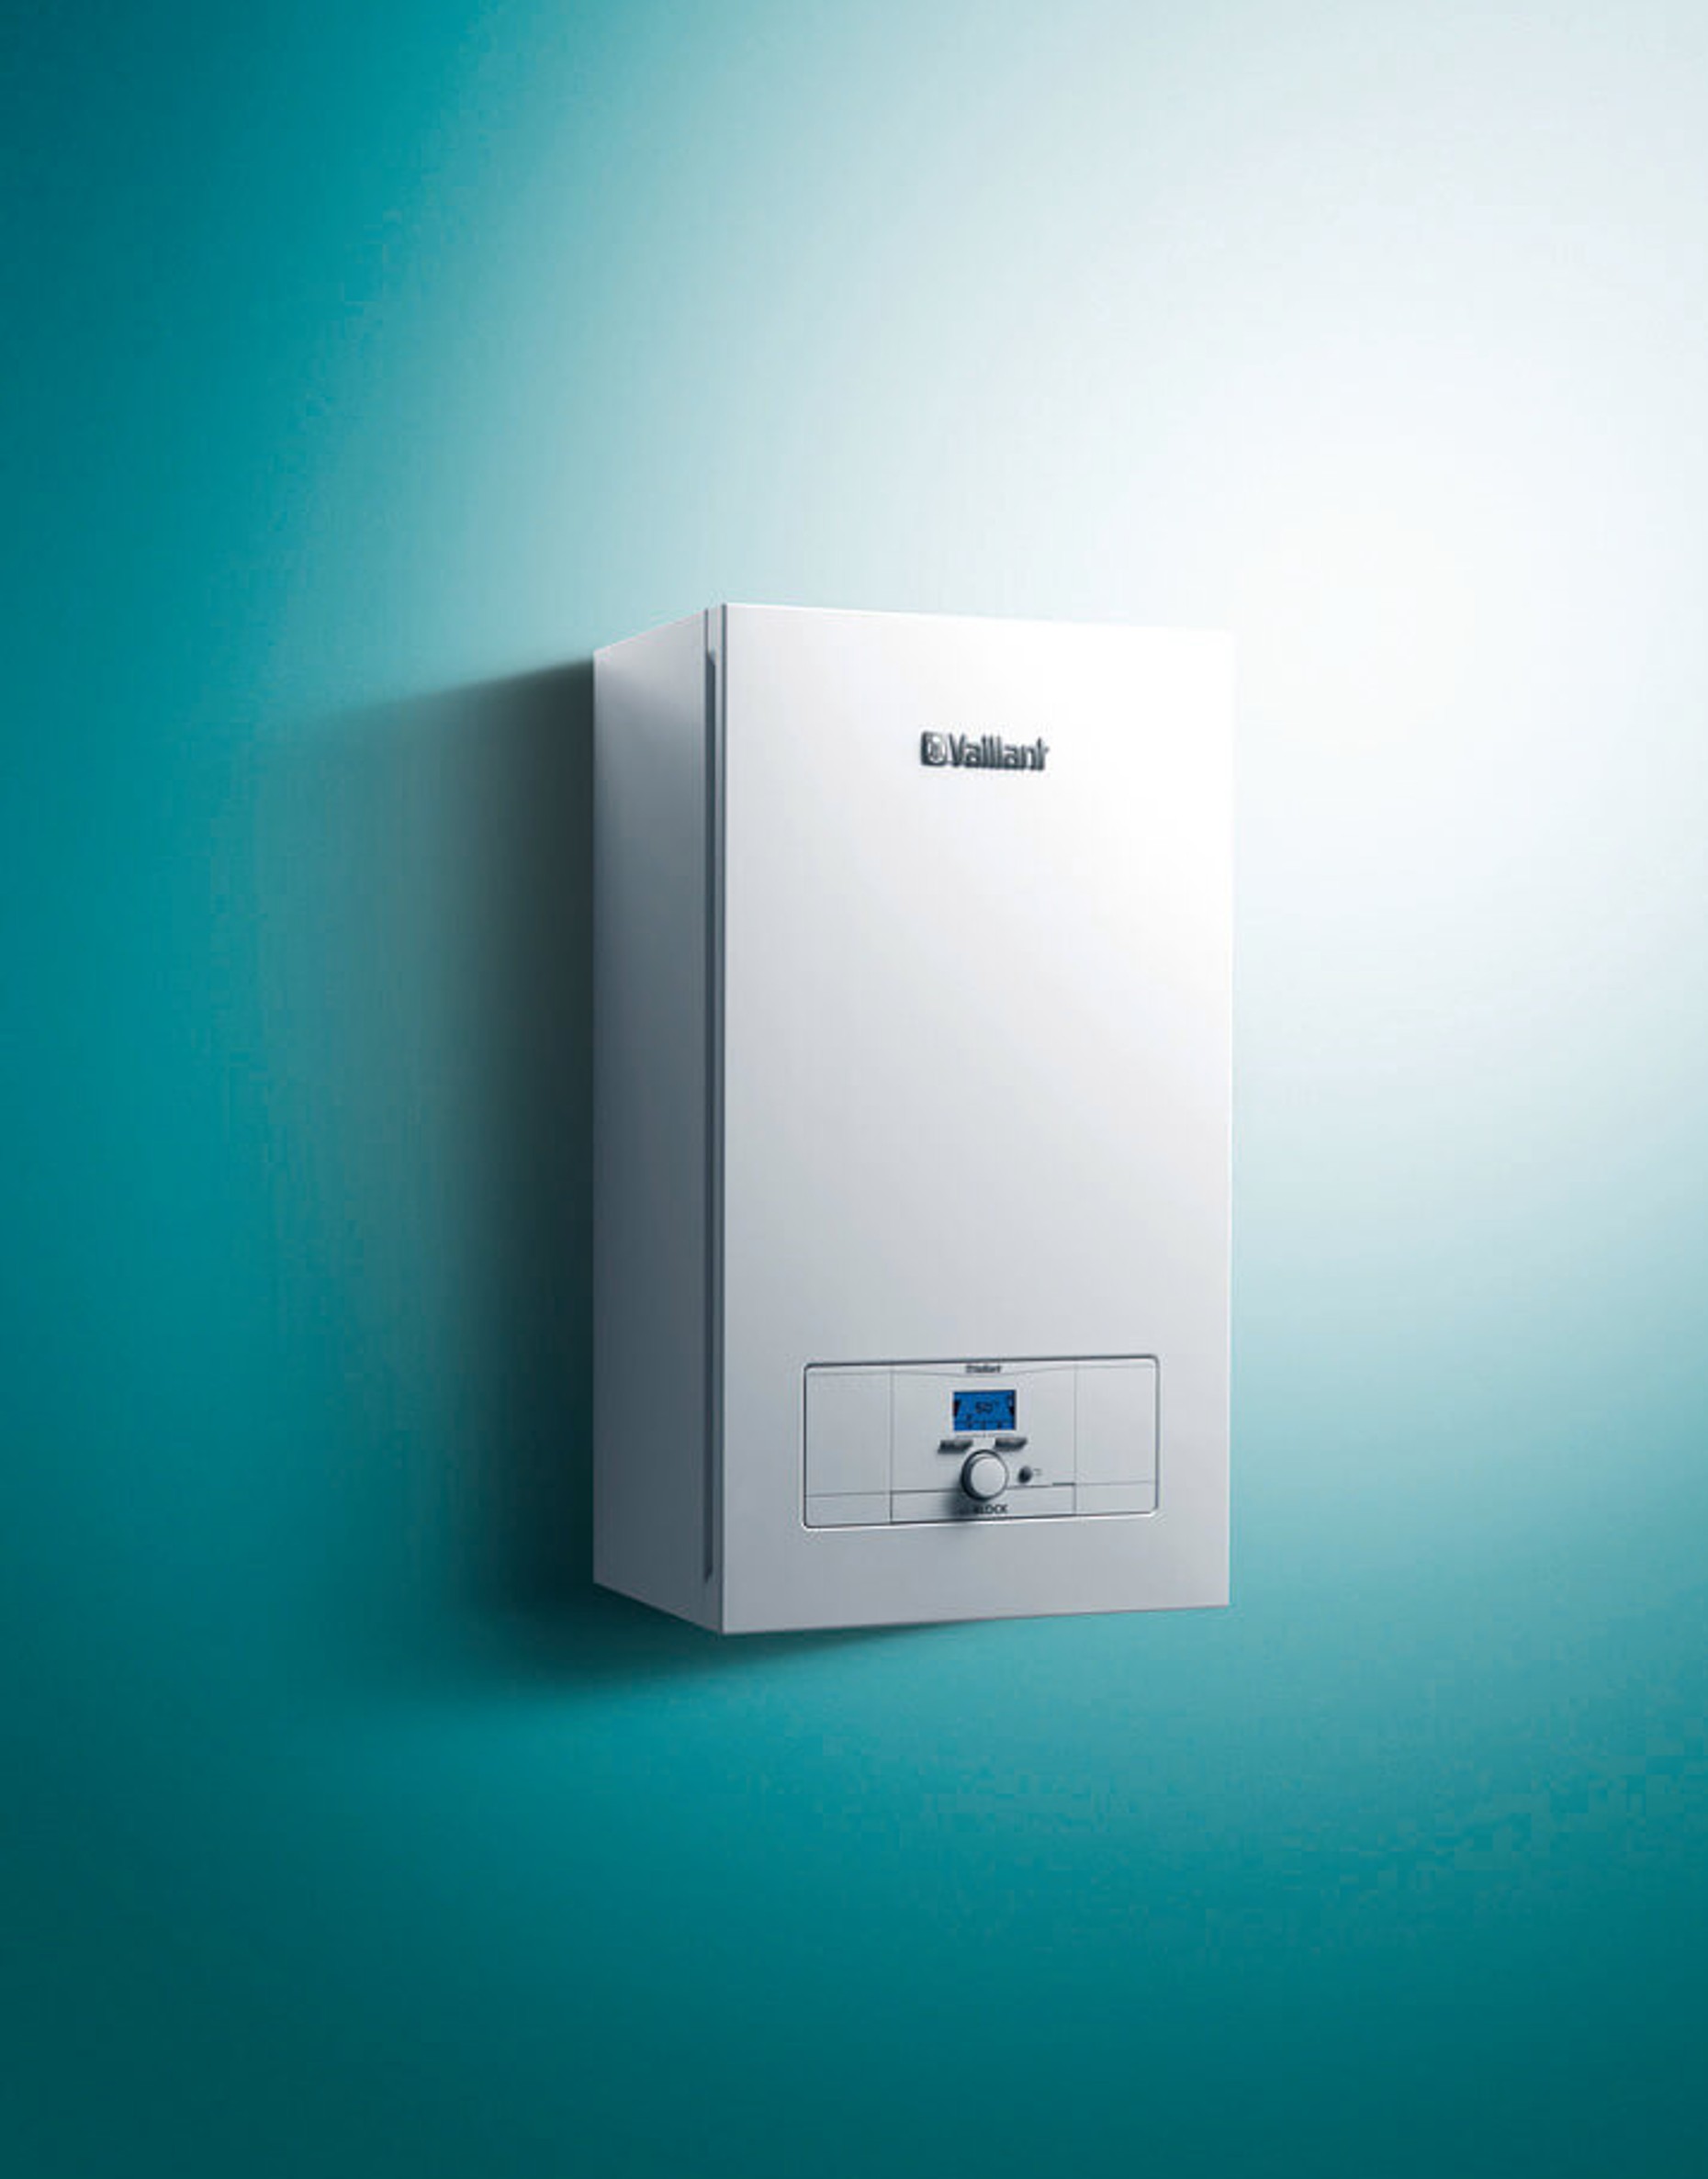 https://www.vaillant.be/pictures/product/eloblock/whbel18-15661-01-1836708-format-flex-height.jpg